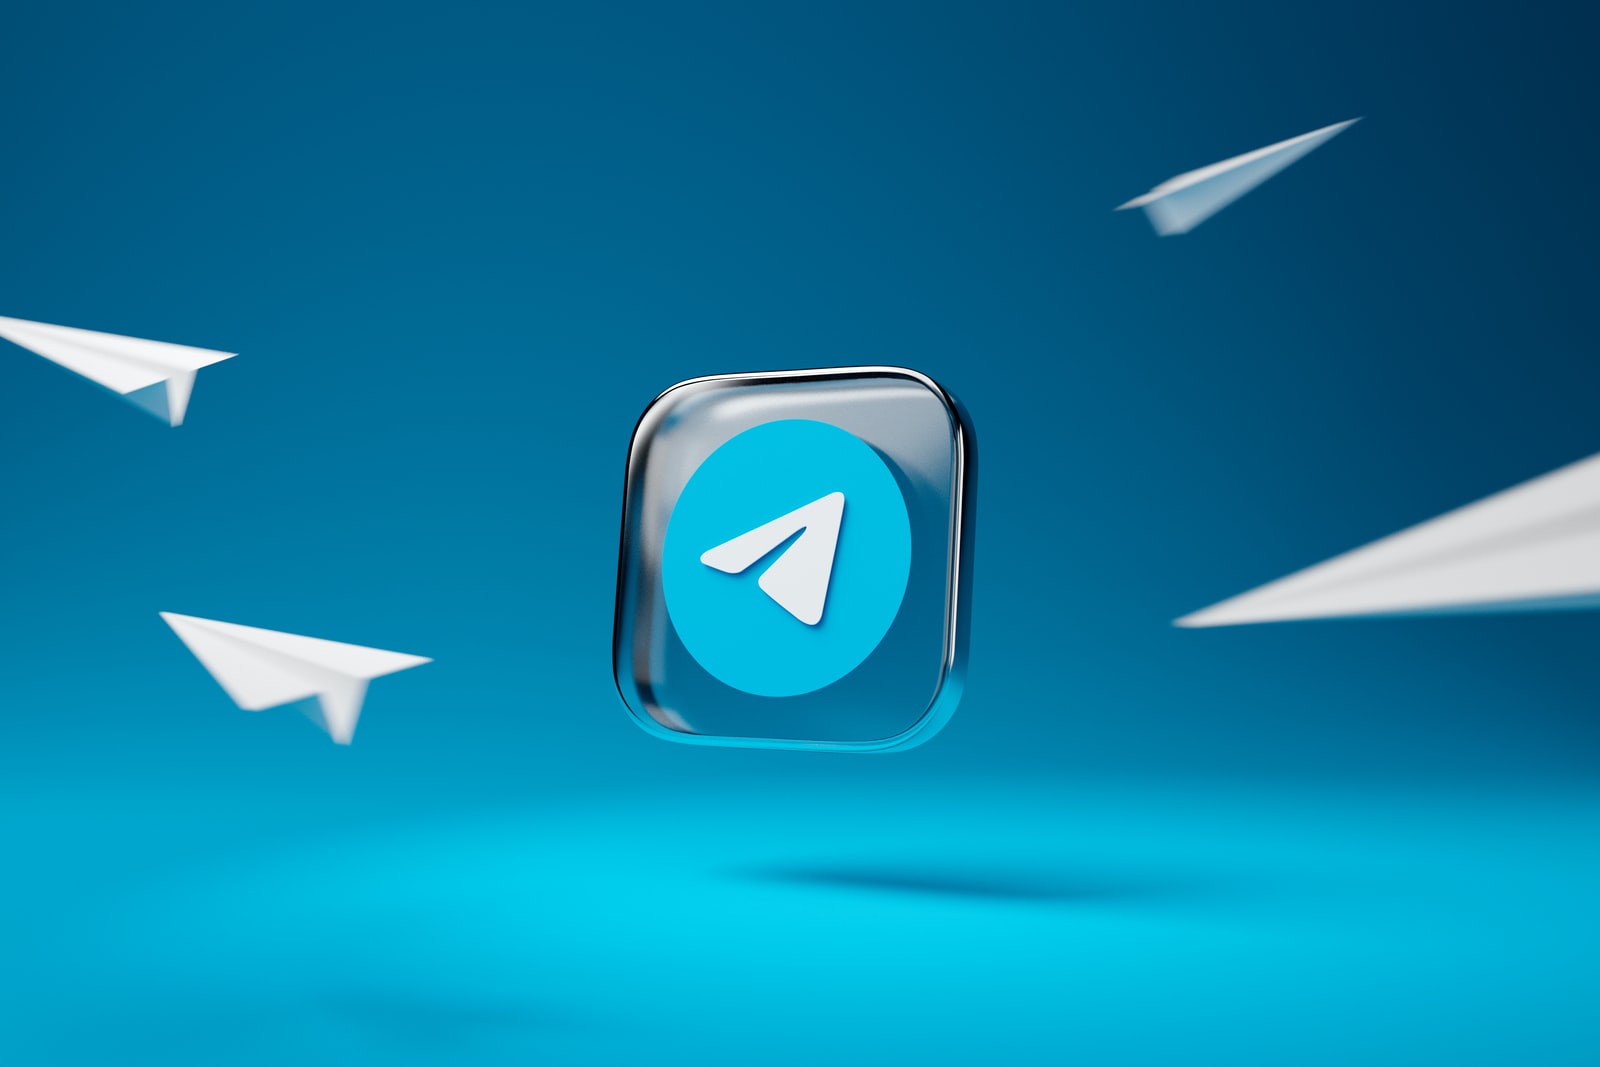 How to subscribe to Telegram Premium on iPhone and Android